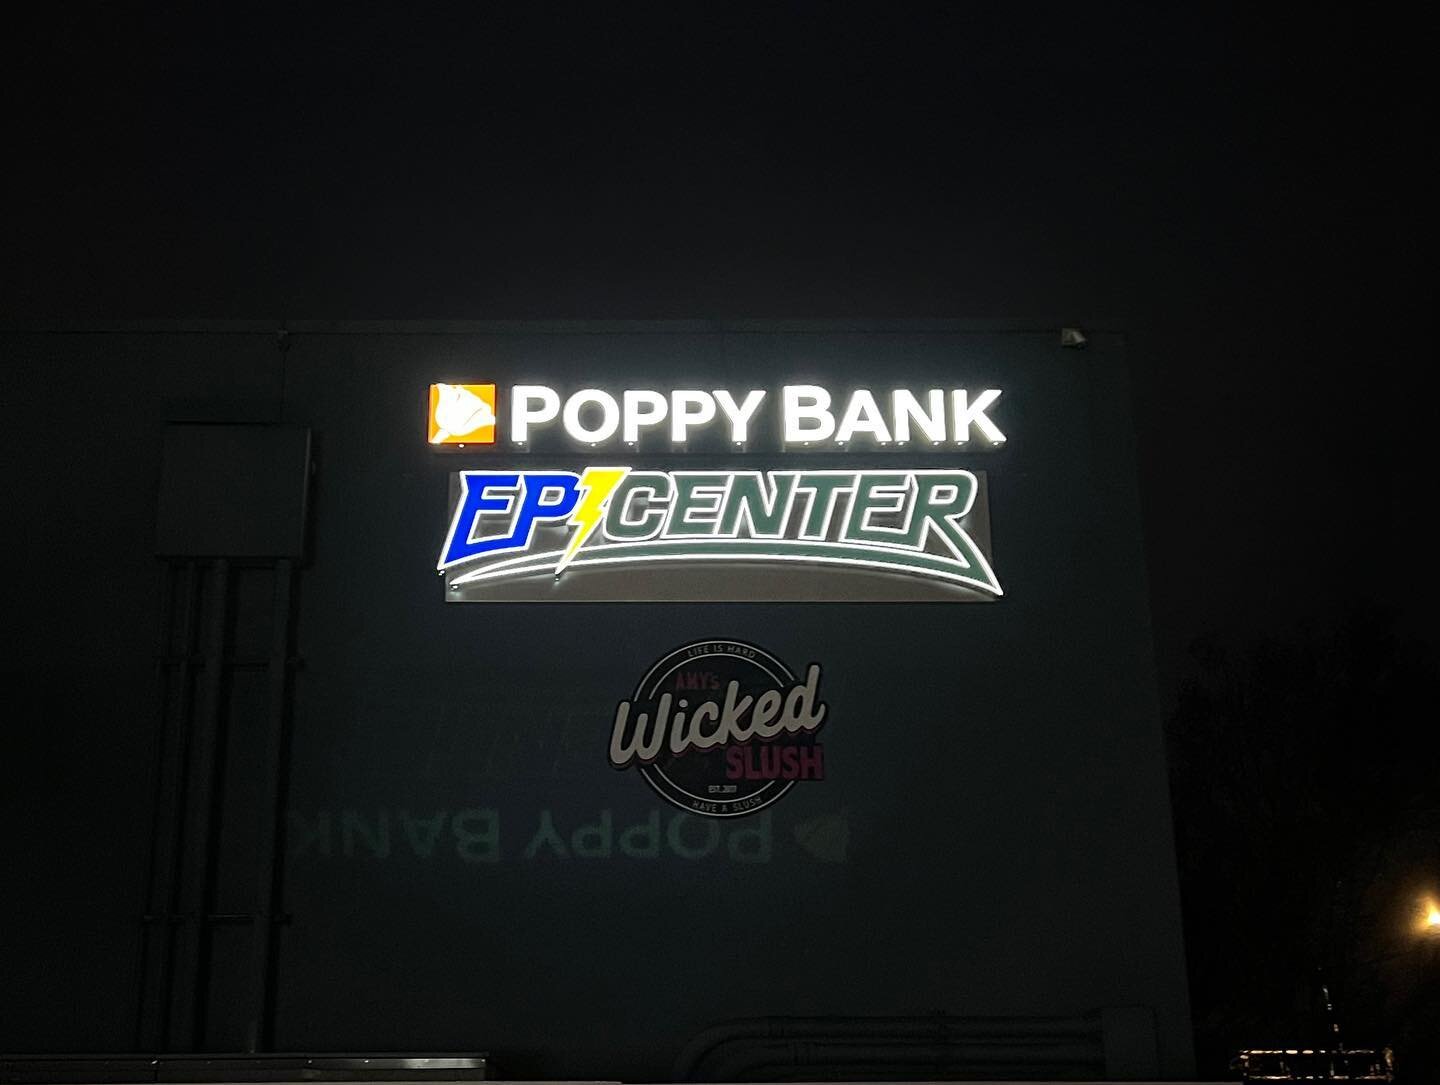 The Epicenter is officially the Poppy Bank Epicenter! New signage outside and new stuff inside! Be sure to check it all out! #golocalsonomacounty #signs #signshop #sonomacountysigns #poppybank